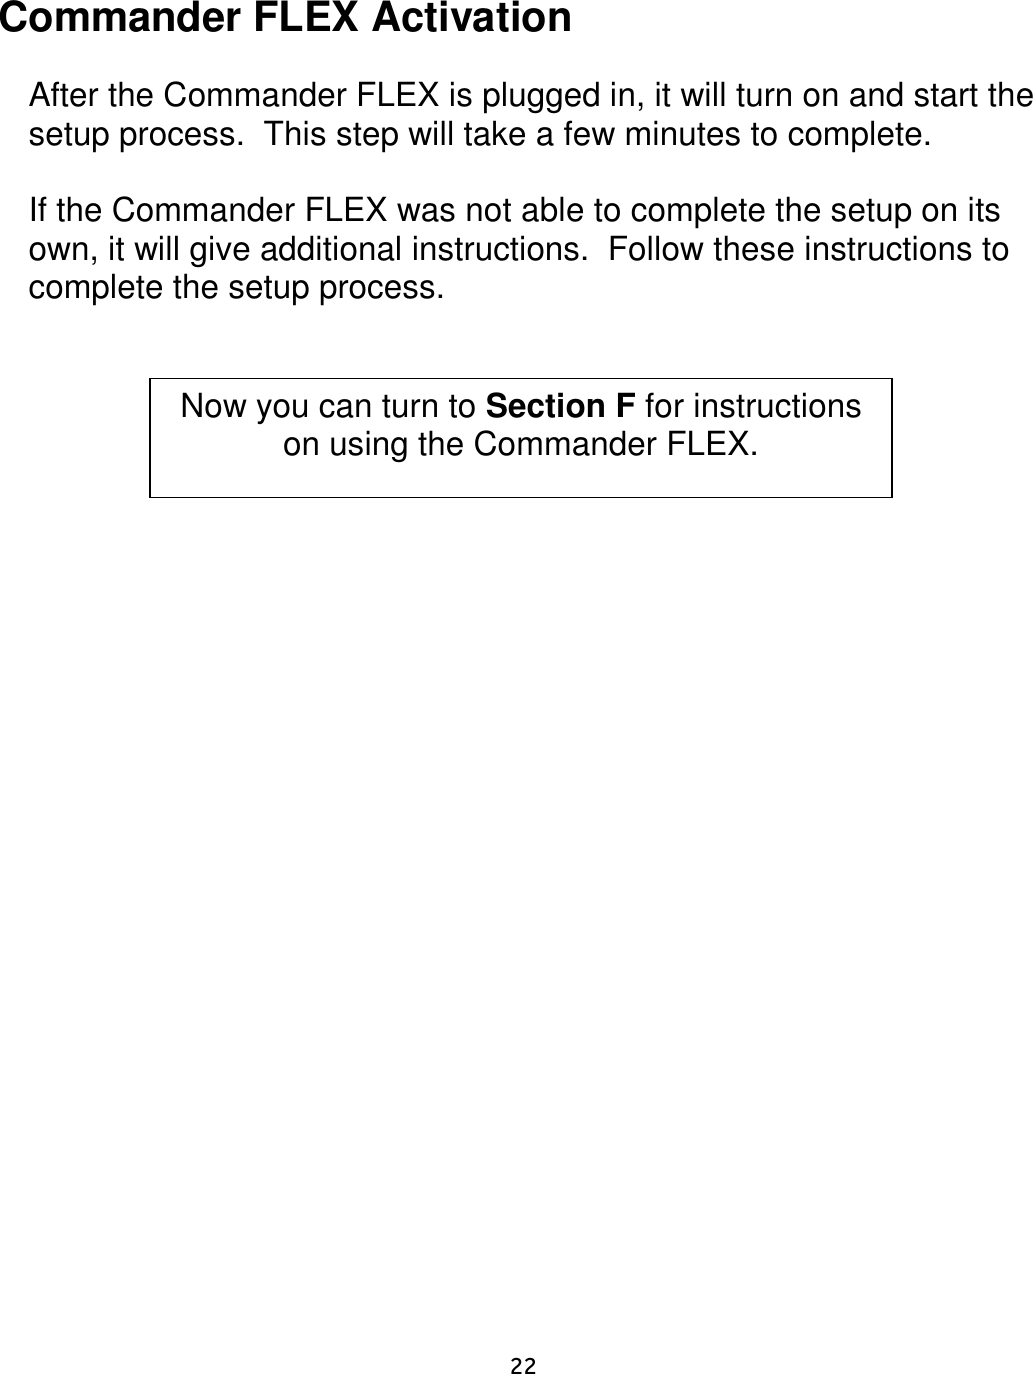     22    Commander FLEX Activation   After the Commander FLEX is plugged in, it will turn on and start the setup process.  This step will take a few minutes to complete.   If the Commander FLEX was not able to complete the setup on its own, it will give additional instructions.  Follow these instructions to complete the setup process.             Now you can turn to Section F for instructions on using the Commander FLEX. 